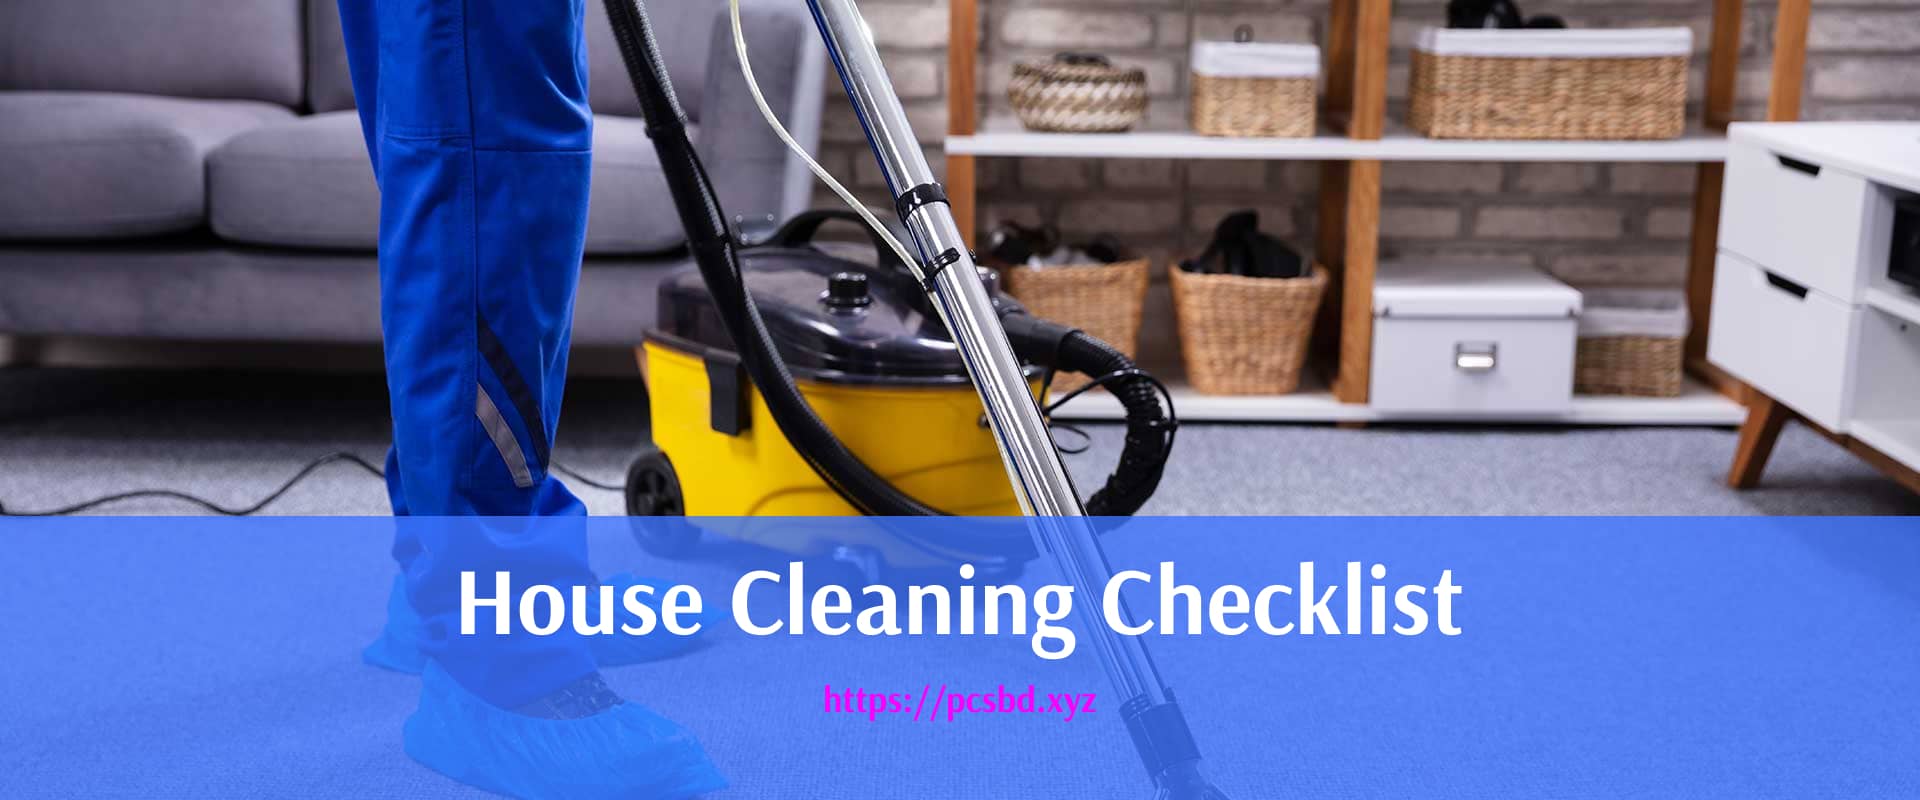 House Cleaning Tips (1)